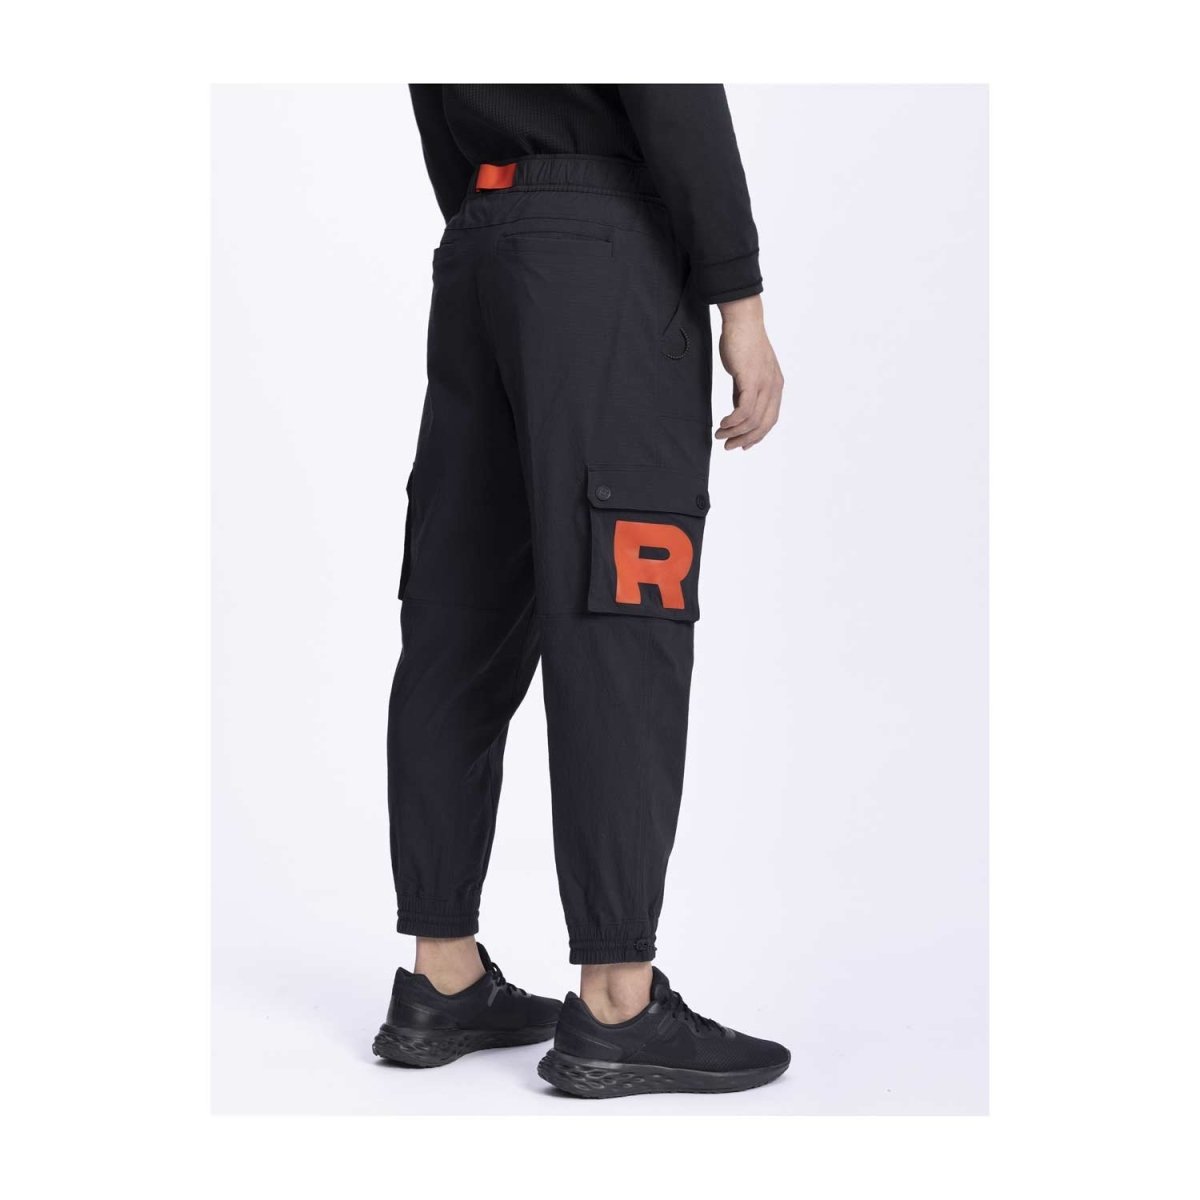 Club Tracksuit Bottoms & Skinny Joggers